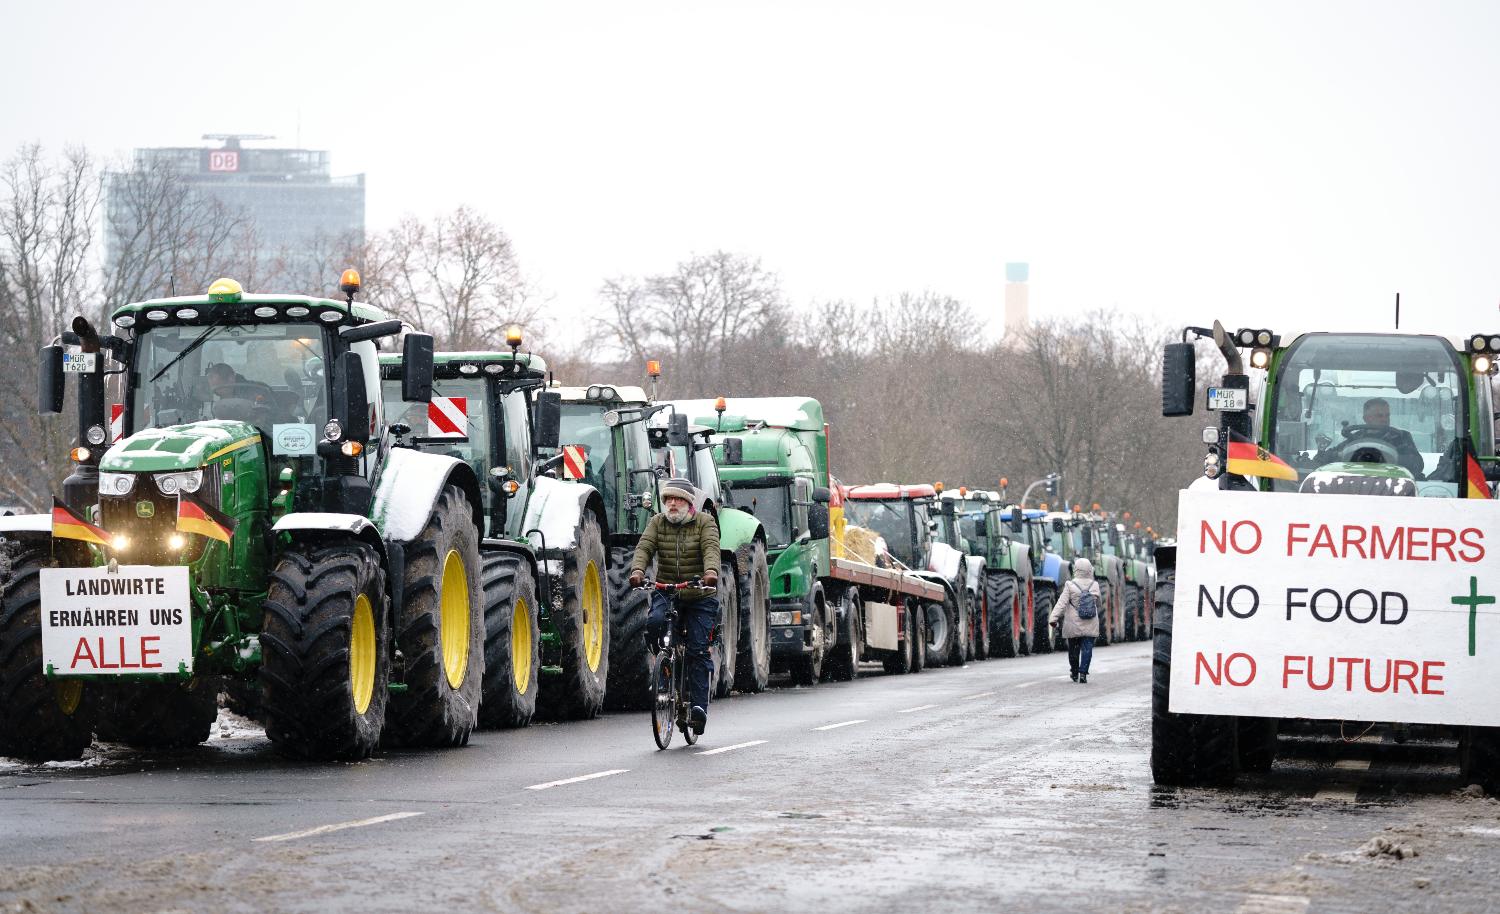 ‘No food, no future’: German farmers protest against insect protection plans